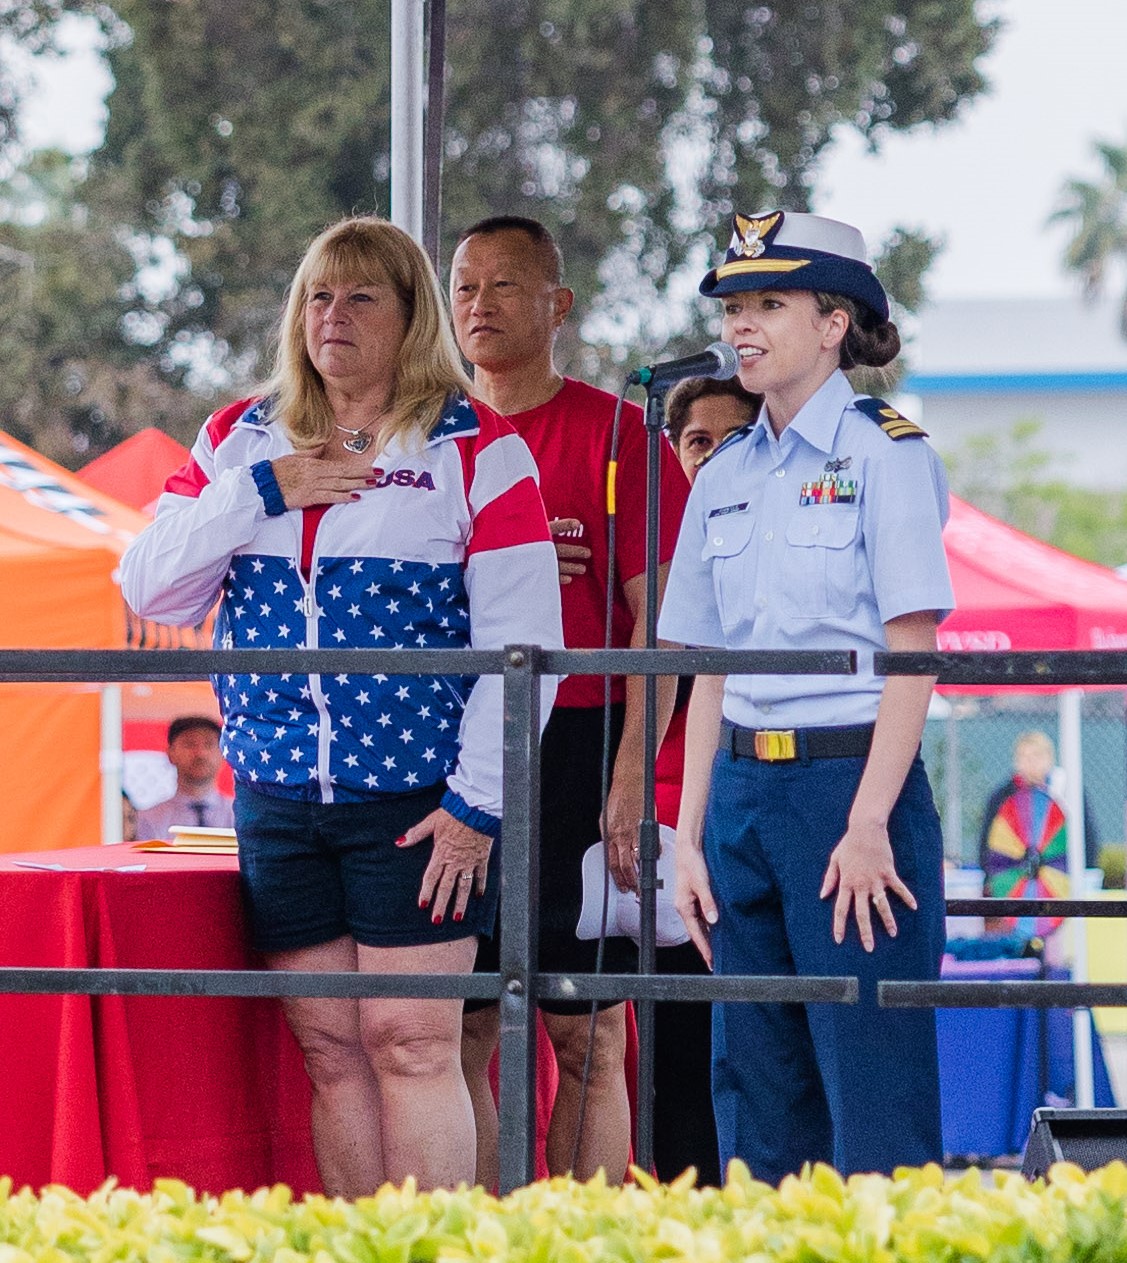 2023 City of Torrance Armed Forces Day Parade and Celebration